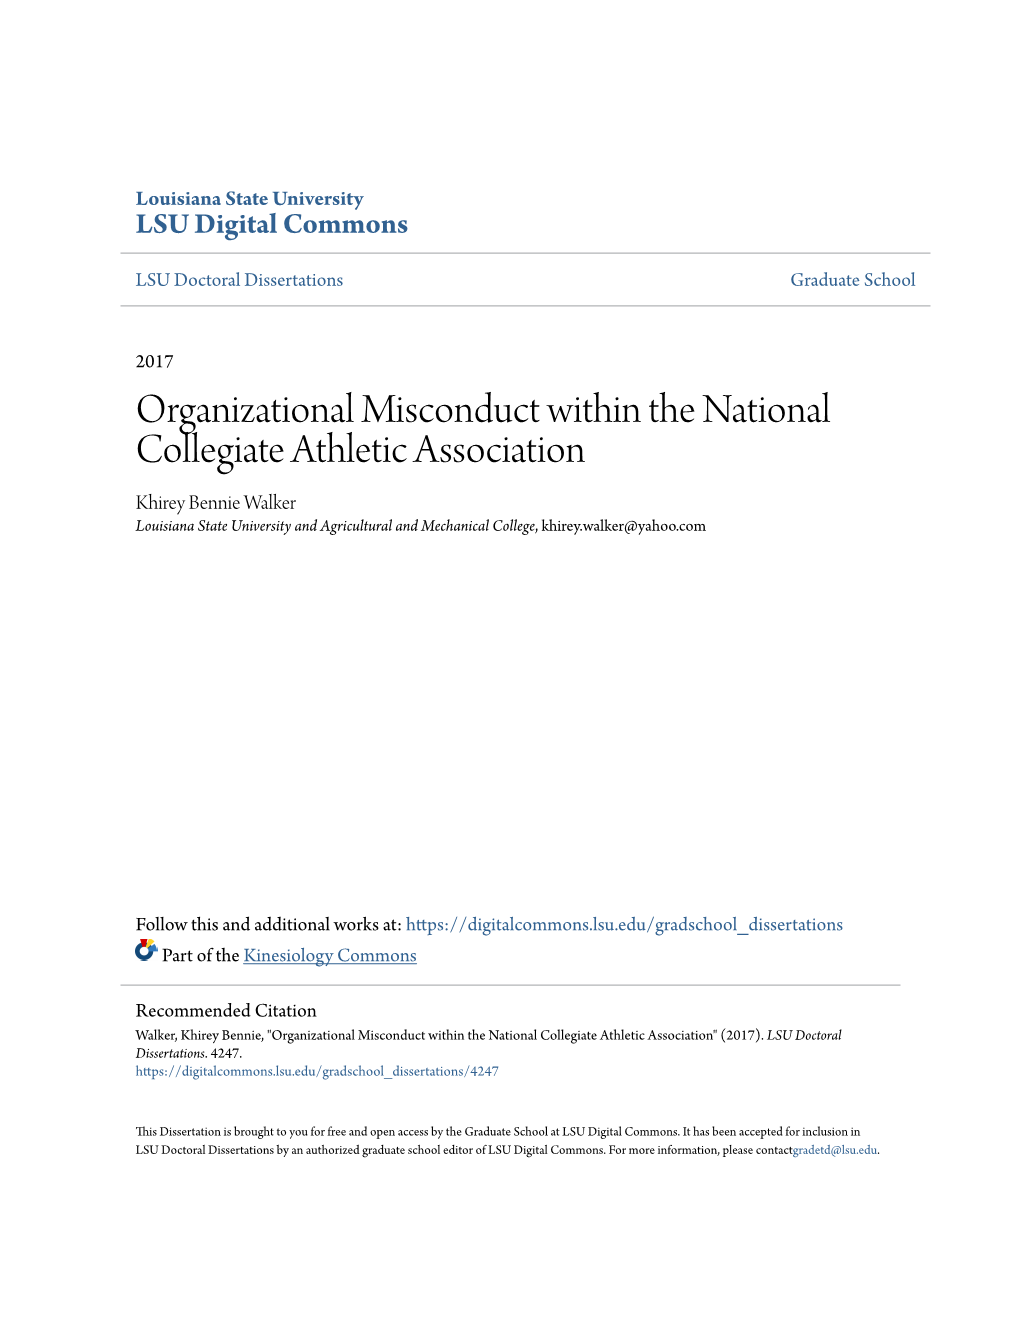 Organizational Misconduct Within the National Collegiate Athletic